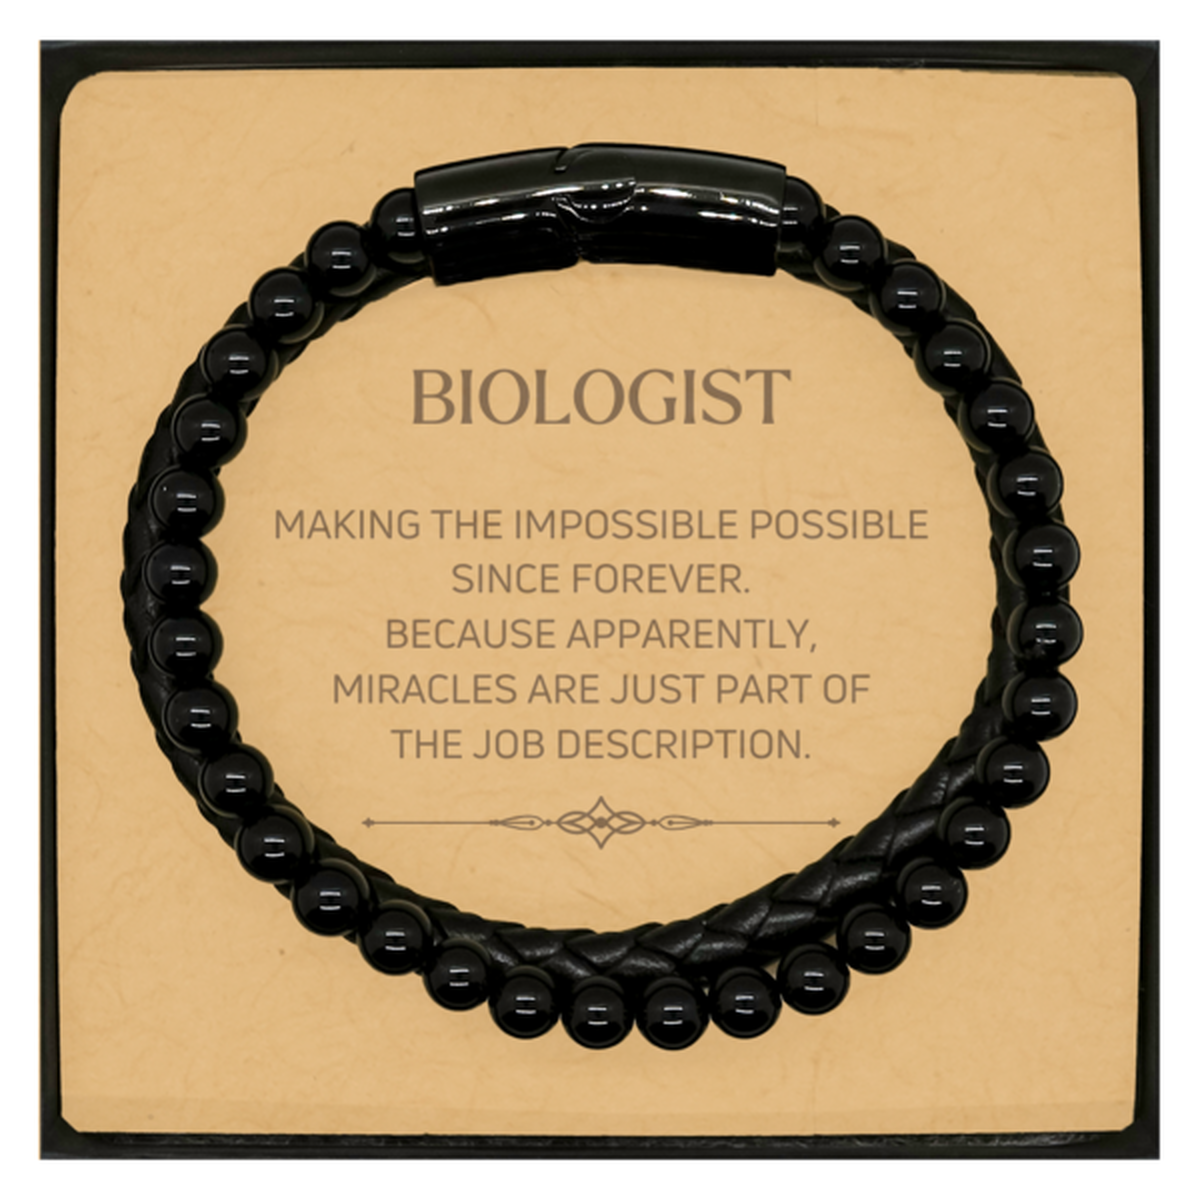 Funny Biologist Gifts, Miracles are just part of the job description, Inspirational Birthday Christmas Stone Leather Bracelets For Biologist, Men, Women, Coworkers, Friends, Boss